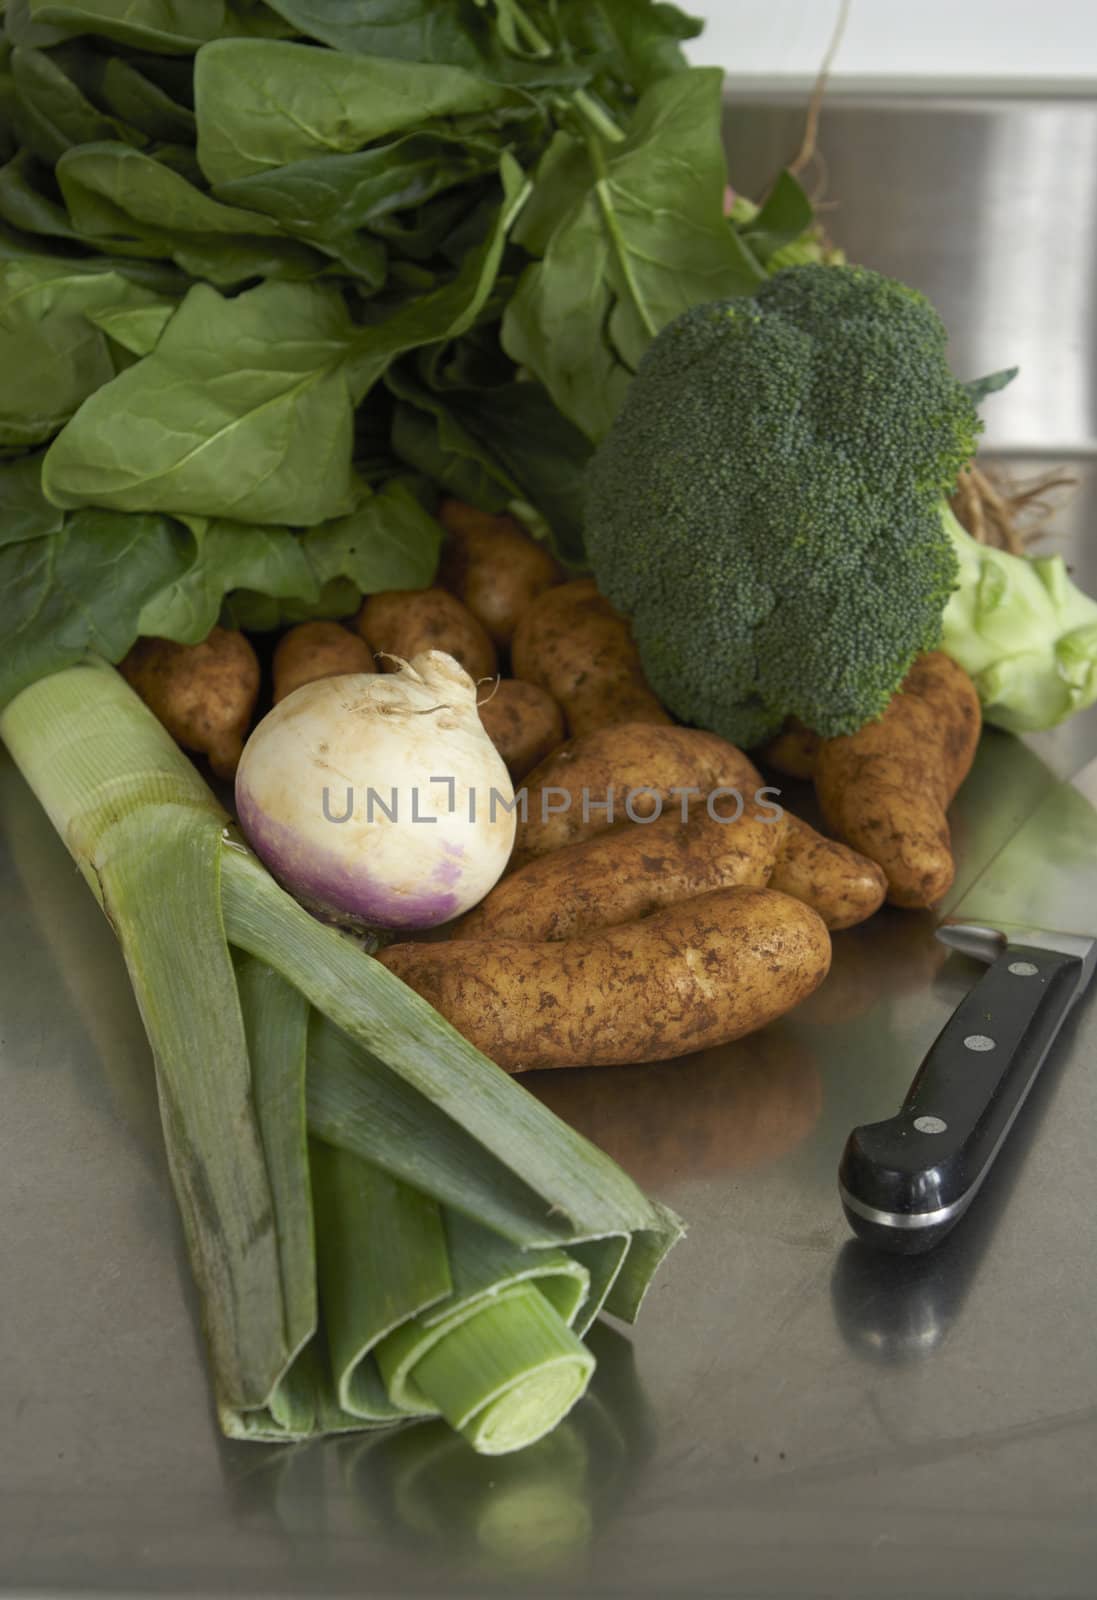 Still life of vegetables on stainless steel bench with knife